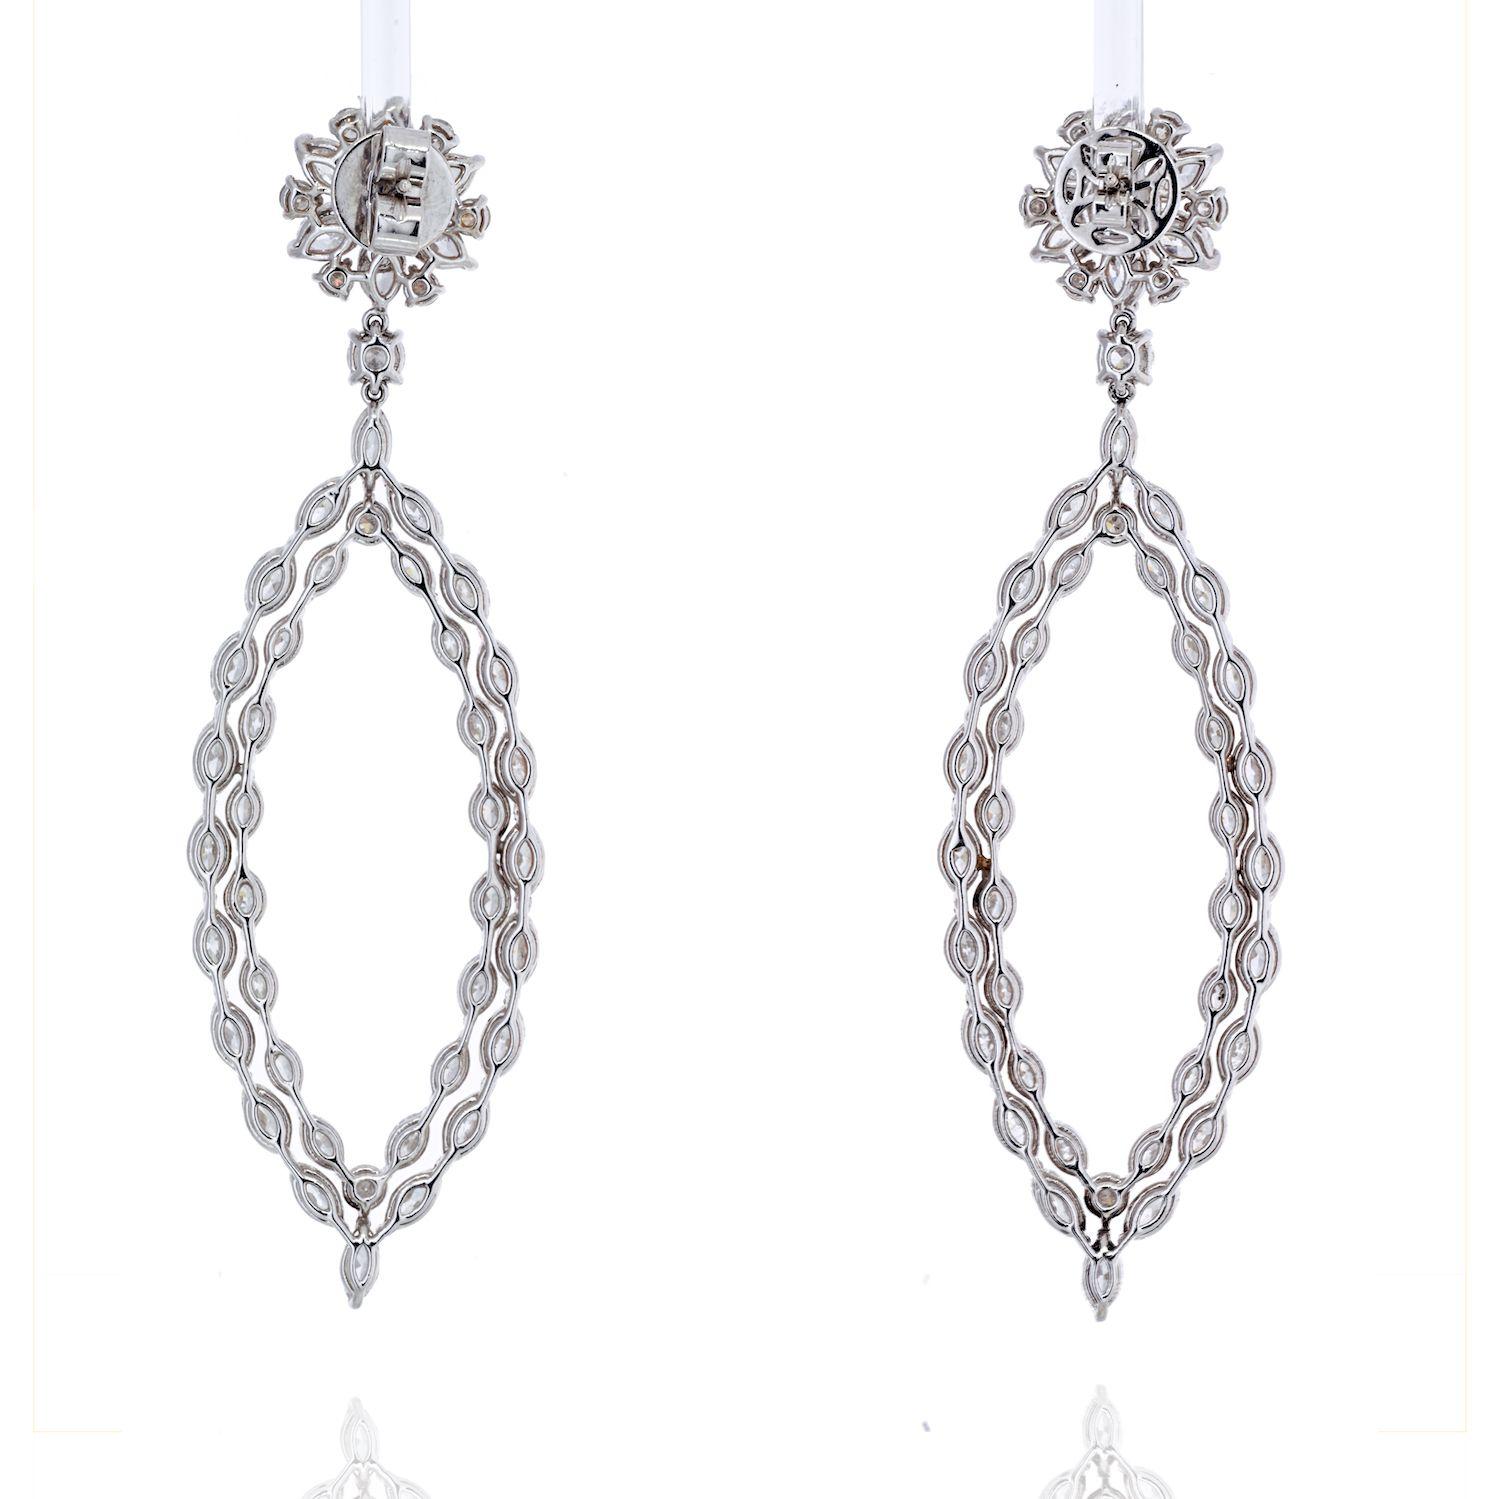 Modern 16 Carat Dangling Round and Marquise Cut Diamond Earrings For Sale